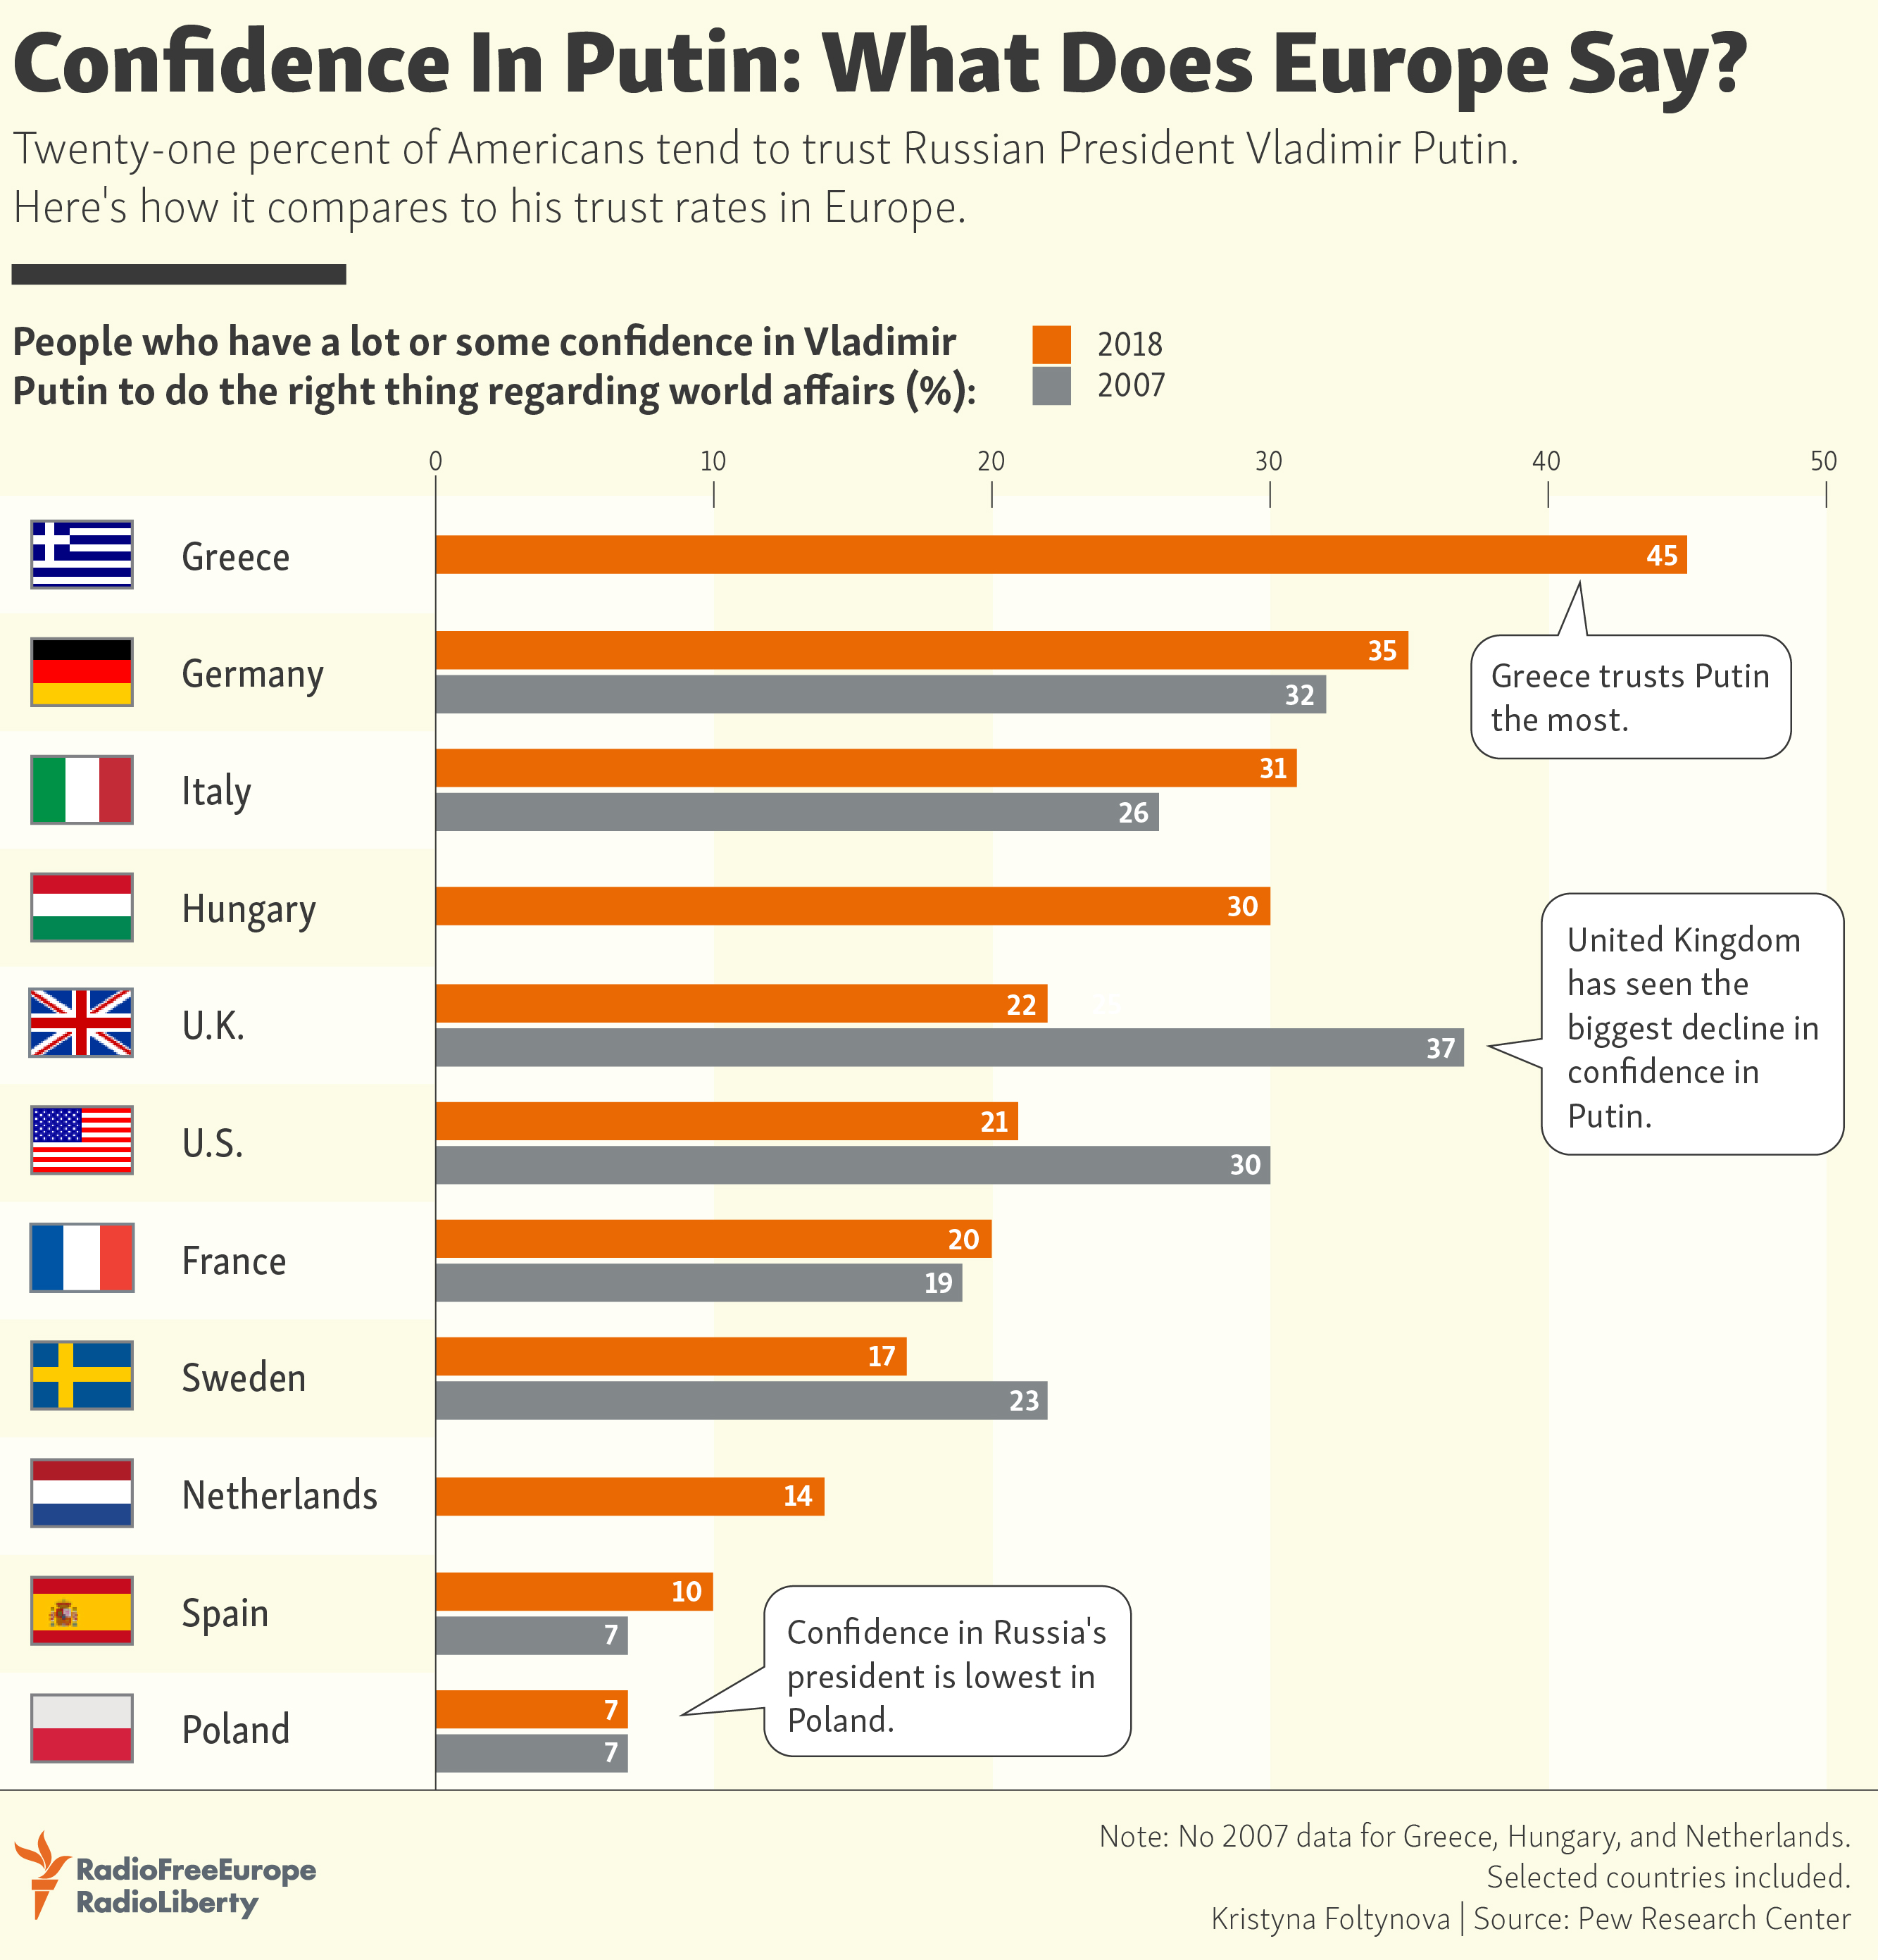 Confidence In Putin: What Does Europe Say?